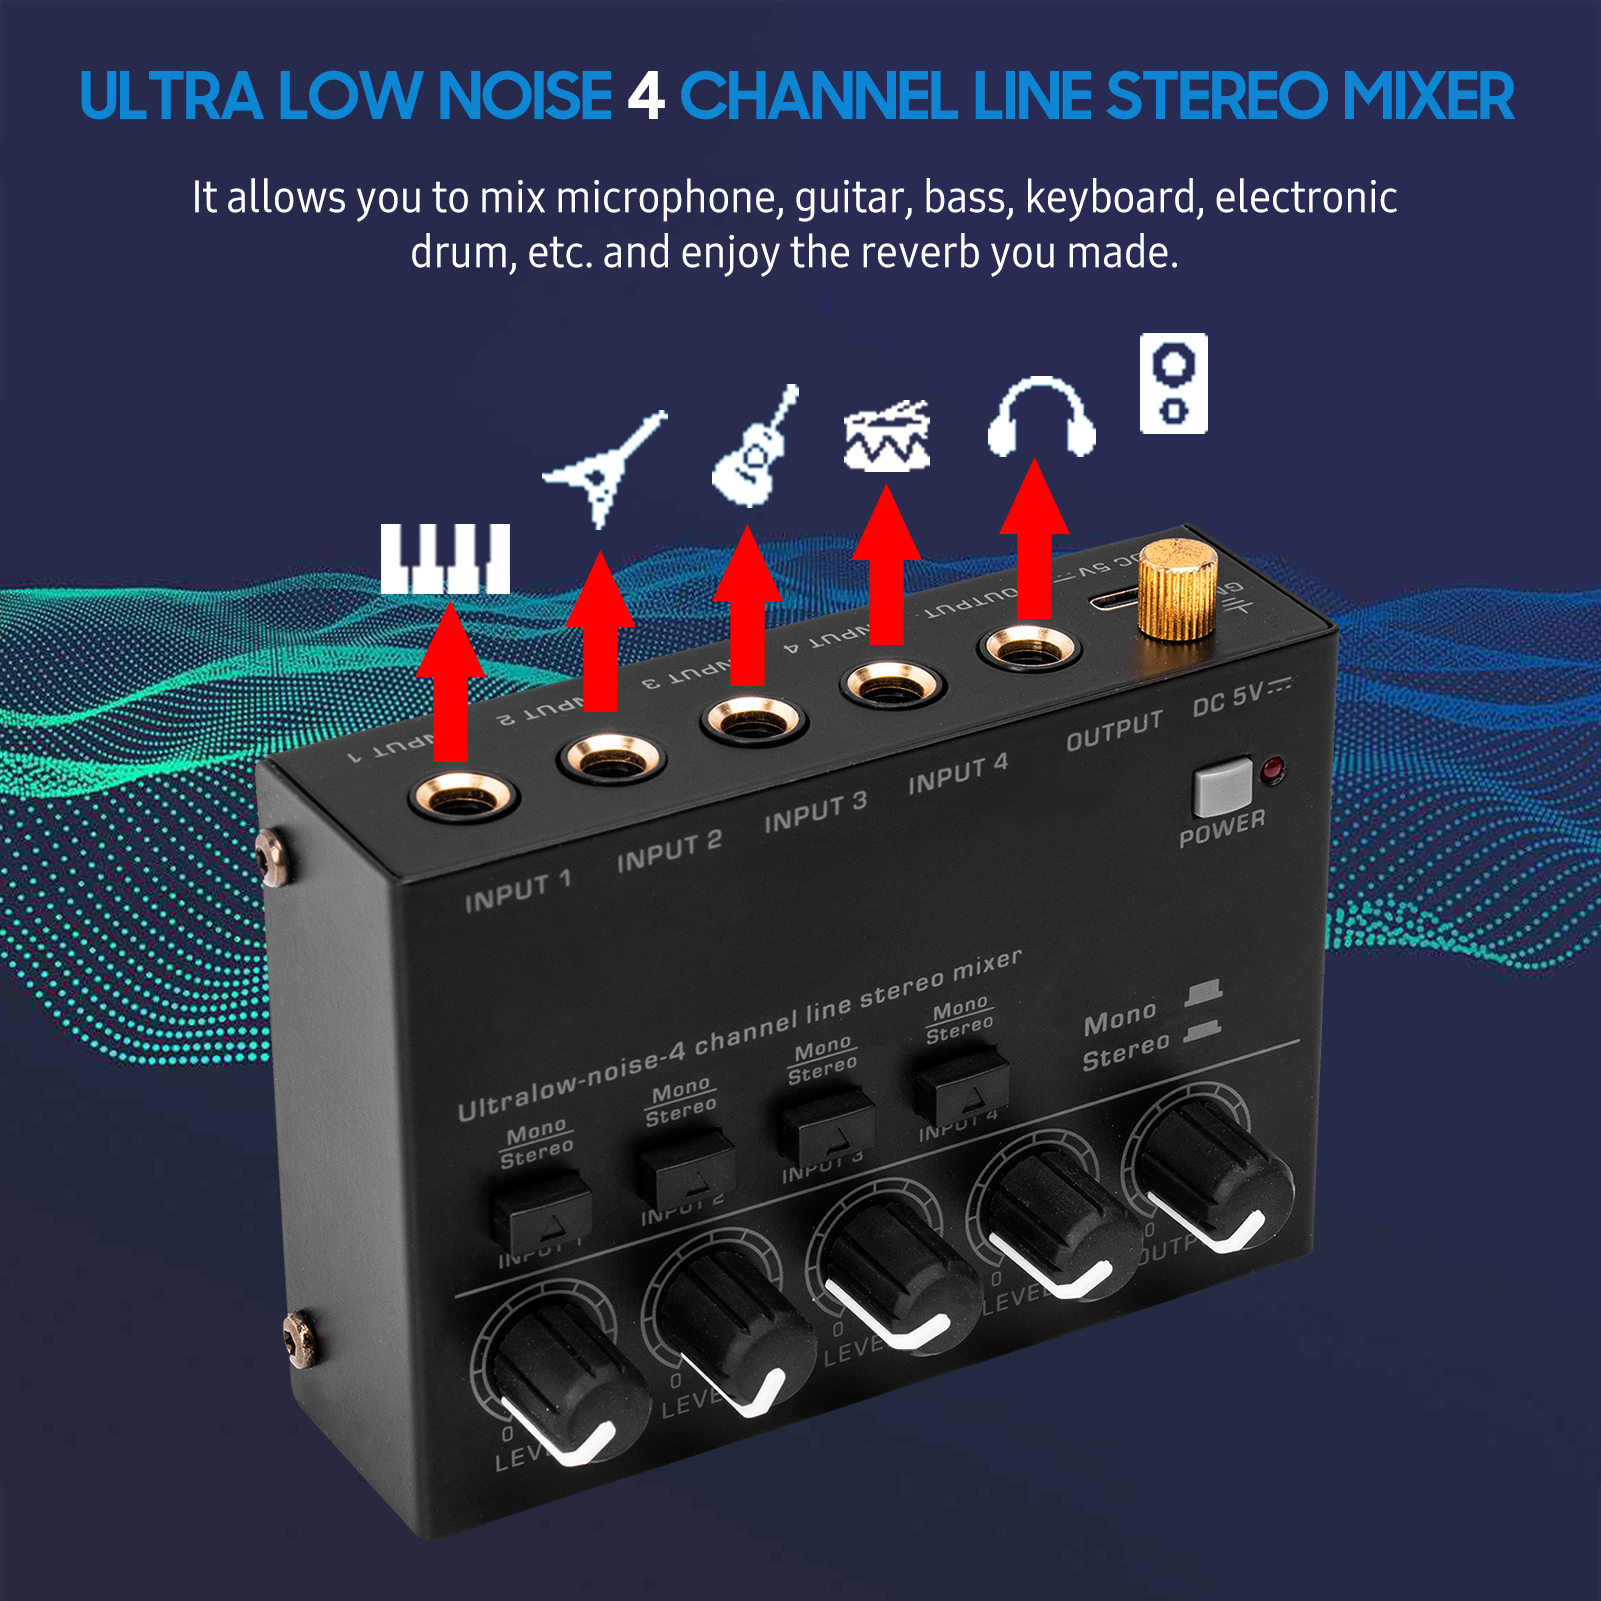 Ultra Low Noise 4 Channel Line Stereo Mixer 4 Input 1 Output DC 5V Portable Mini Audio Mixer Microphone Guitar Bass Keyboard Mixers for Bar Stage Studio - image 2 of 7